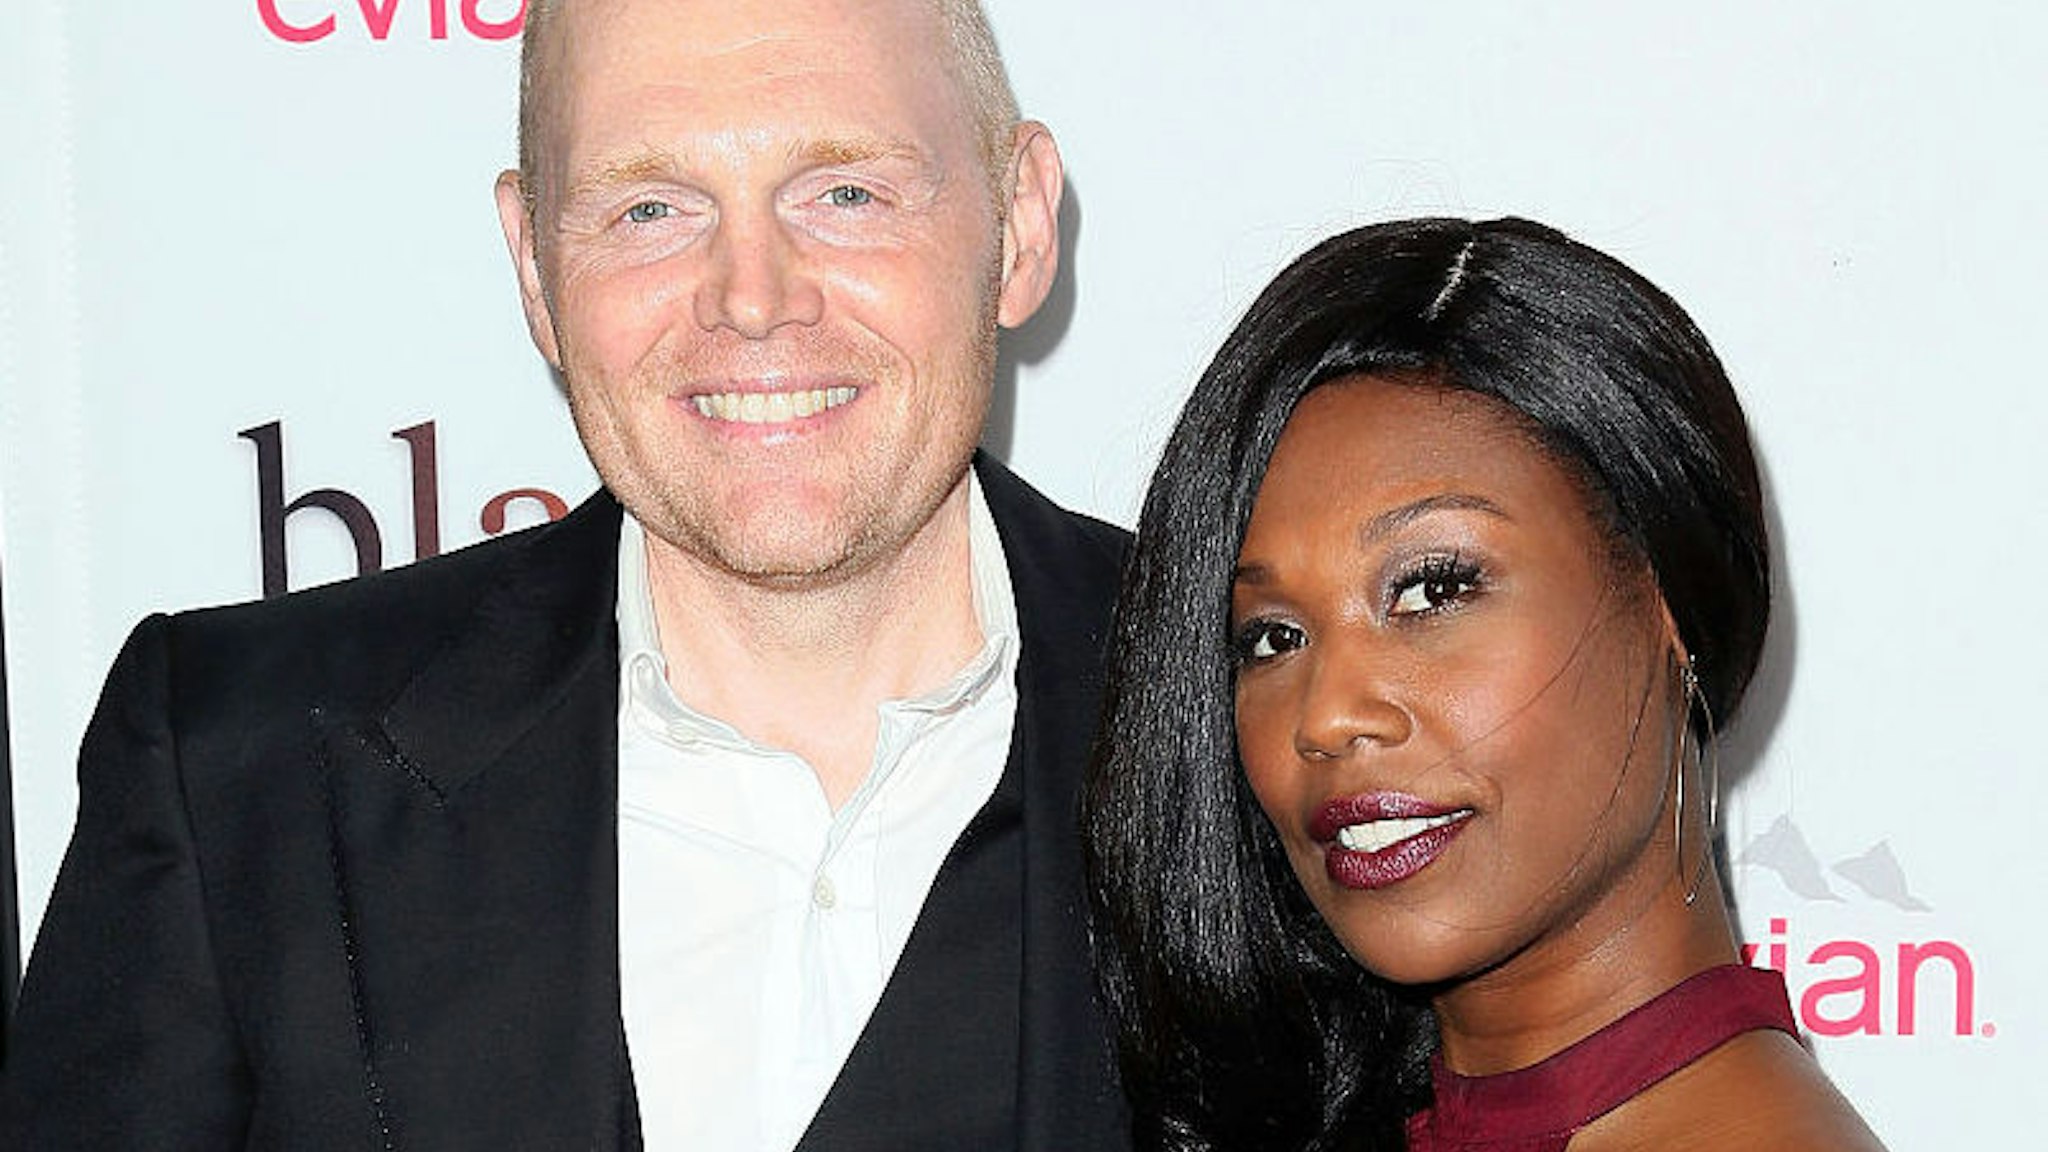 Actor Bill Burr (L) and wife Nia Renee Hill attend the premiere of Relativity Media's "Black or White" at Regal Cinemas L.A. Live on January 20, 2015 in Los Angeles, California.